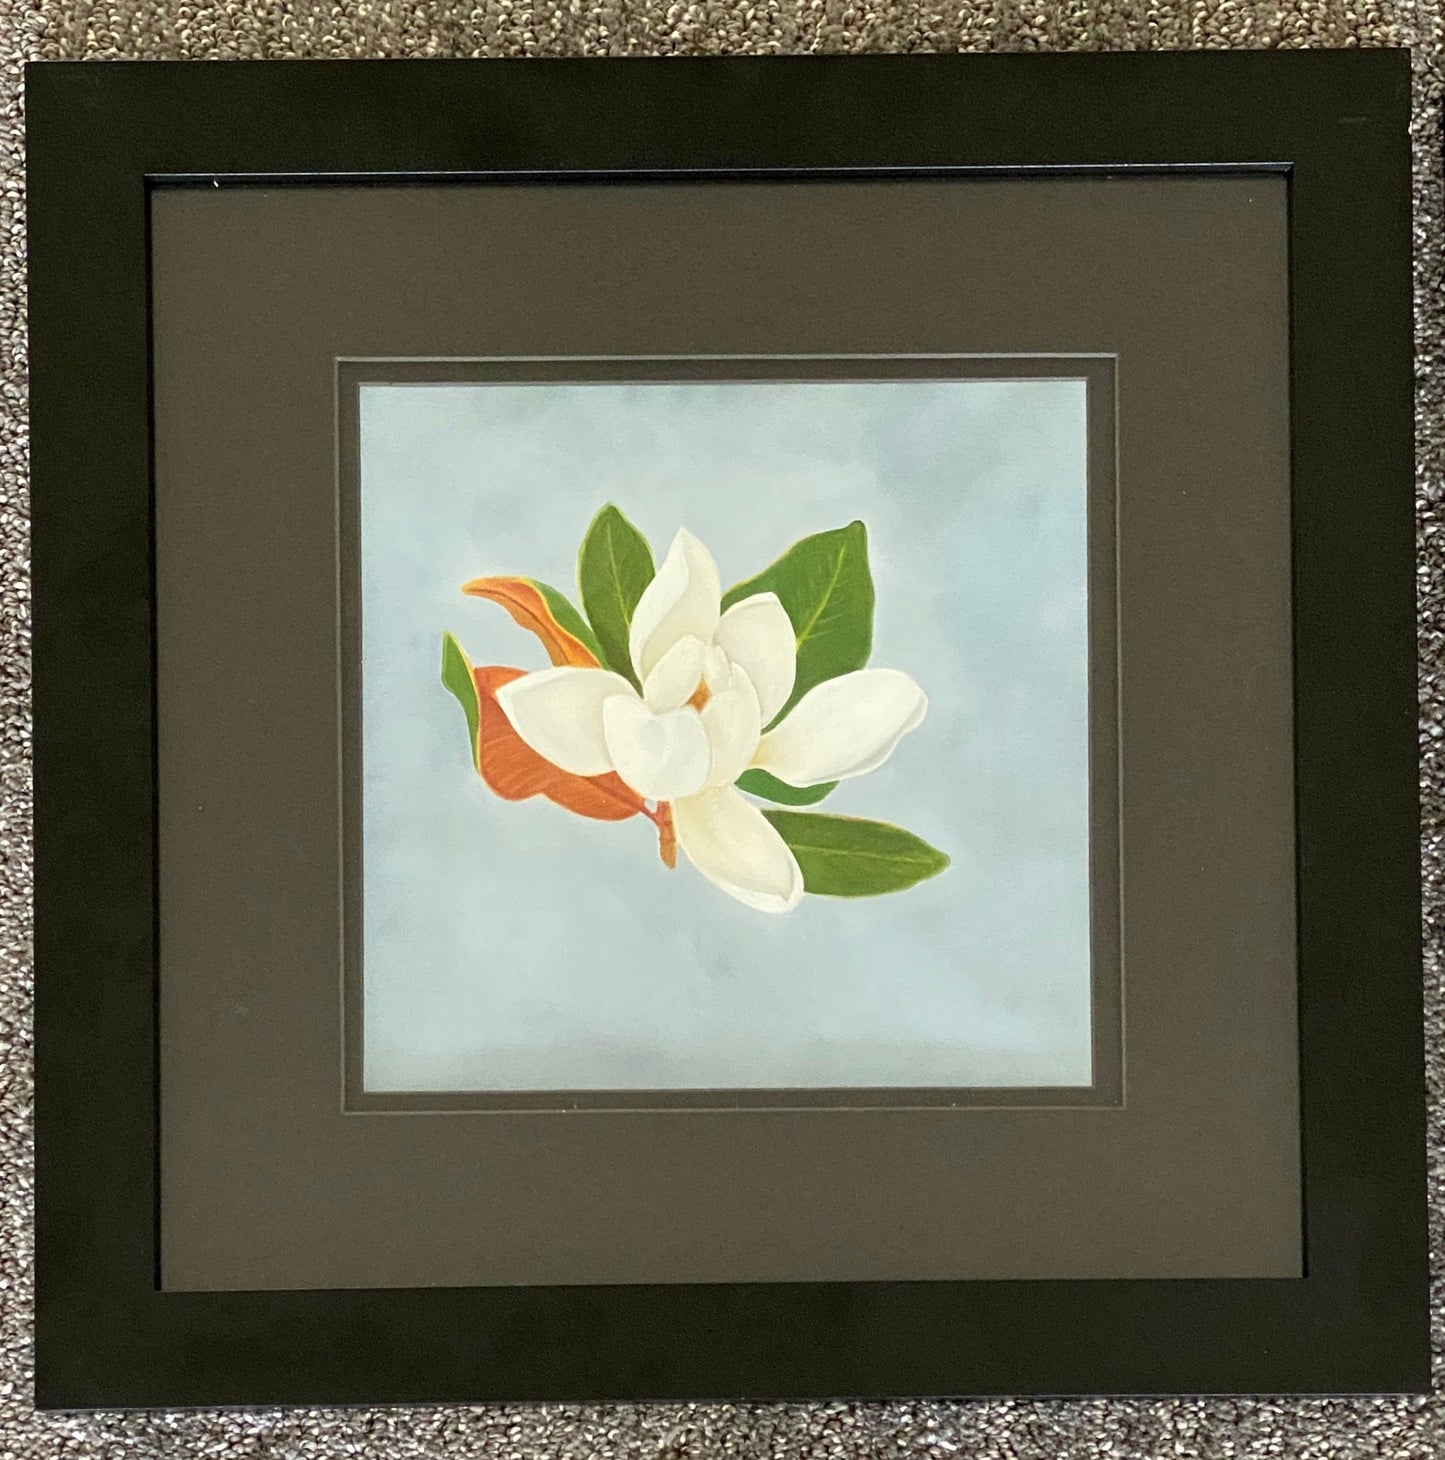 Floral Artwork Little lily II - Original Oil painting by Shobika